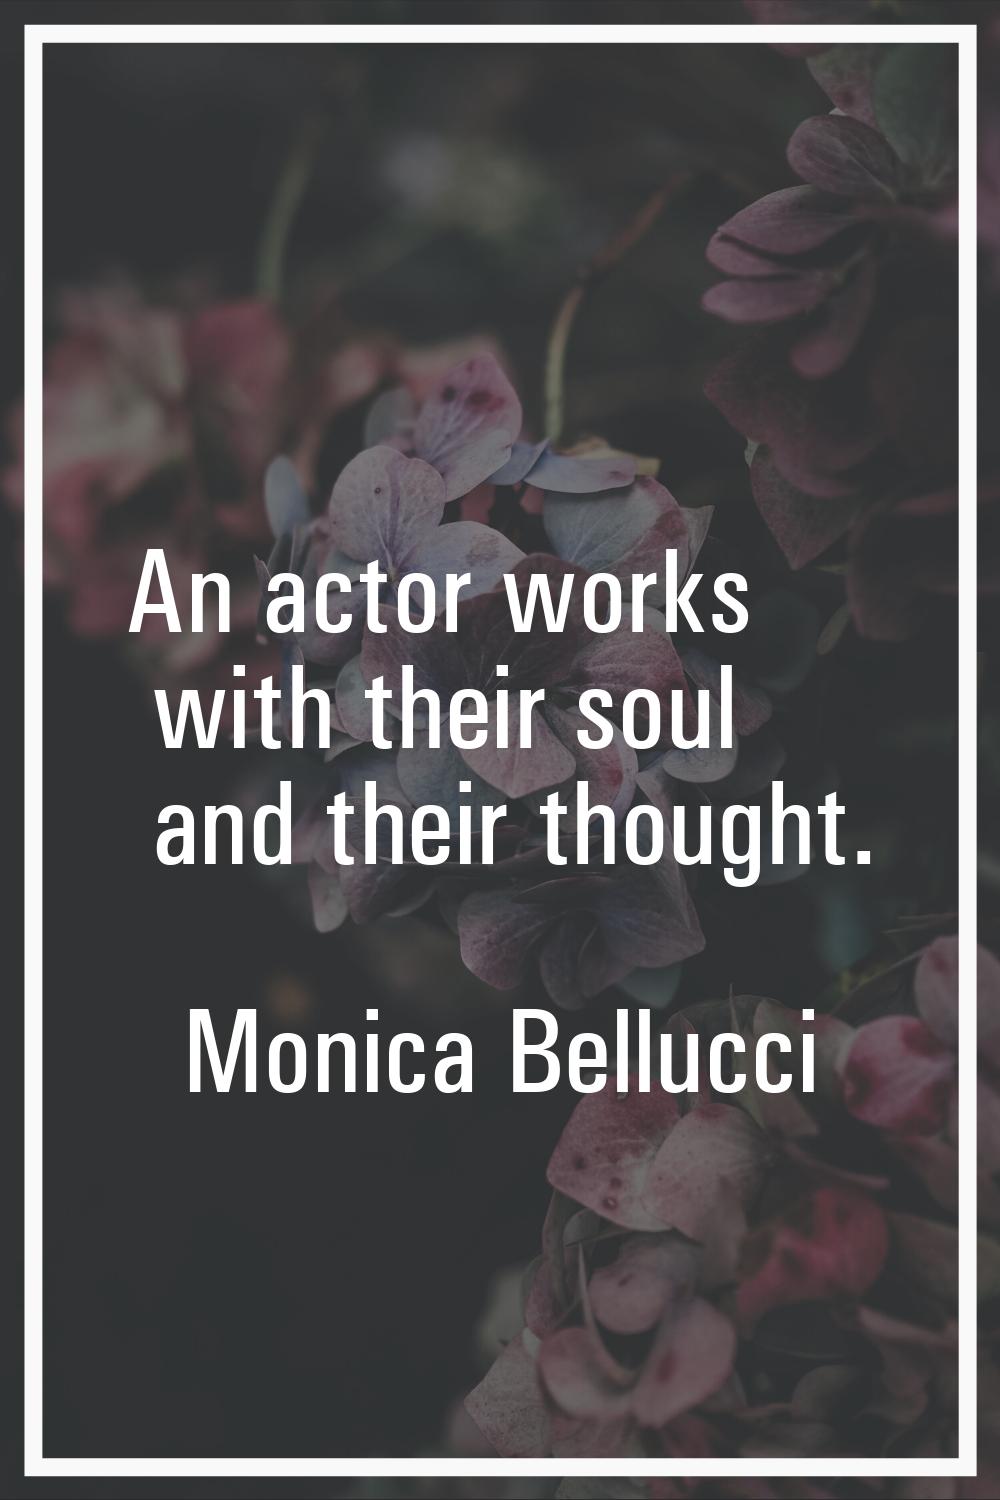 An actor works with their soul and their thought.